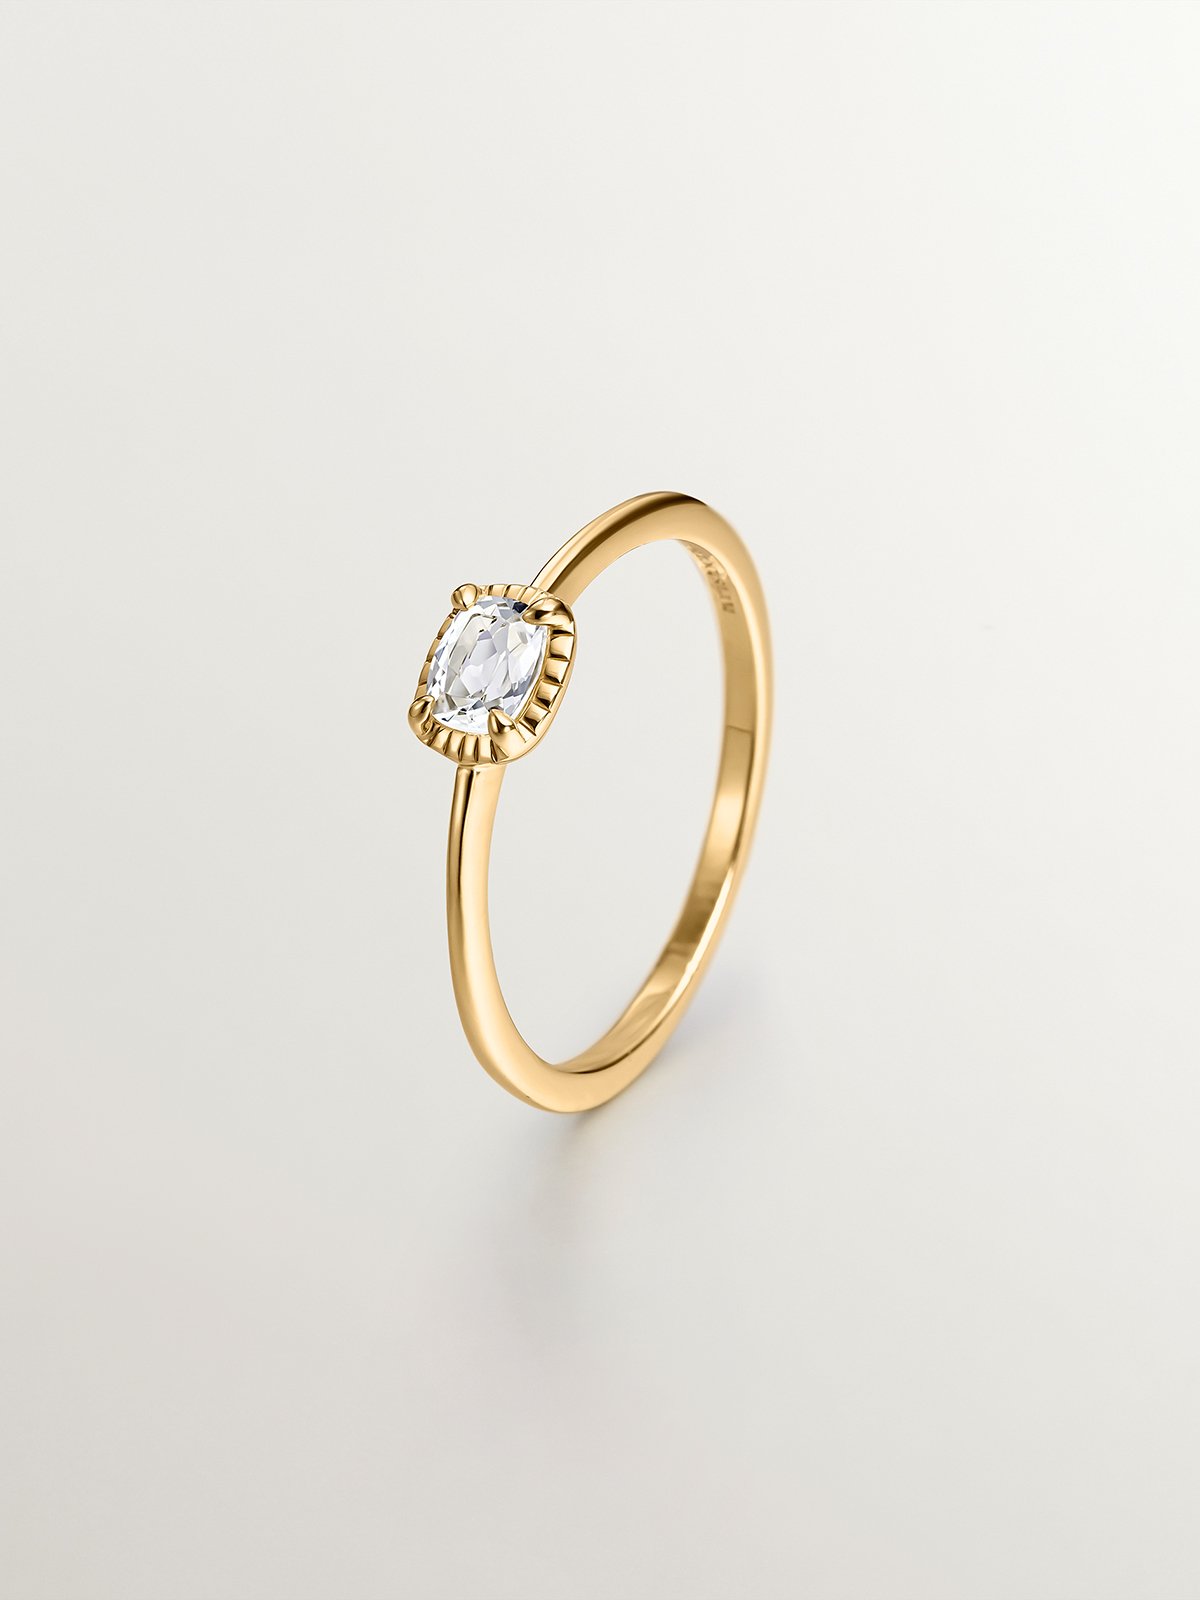 925 Silver ring bathed in 18K yellow gold with white topaz.